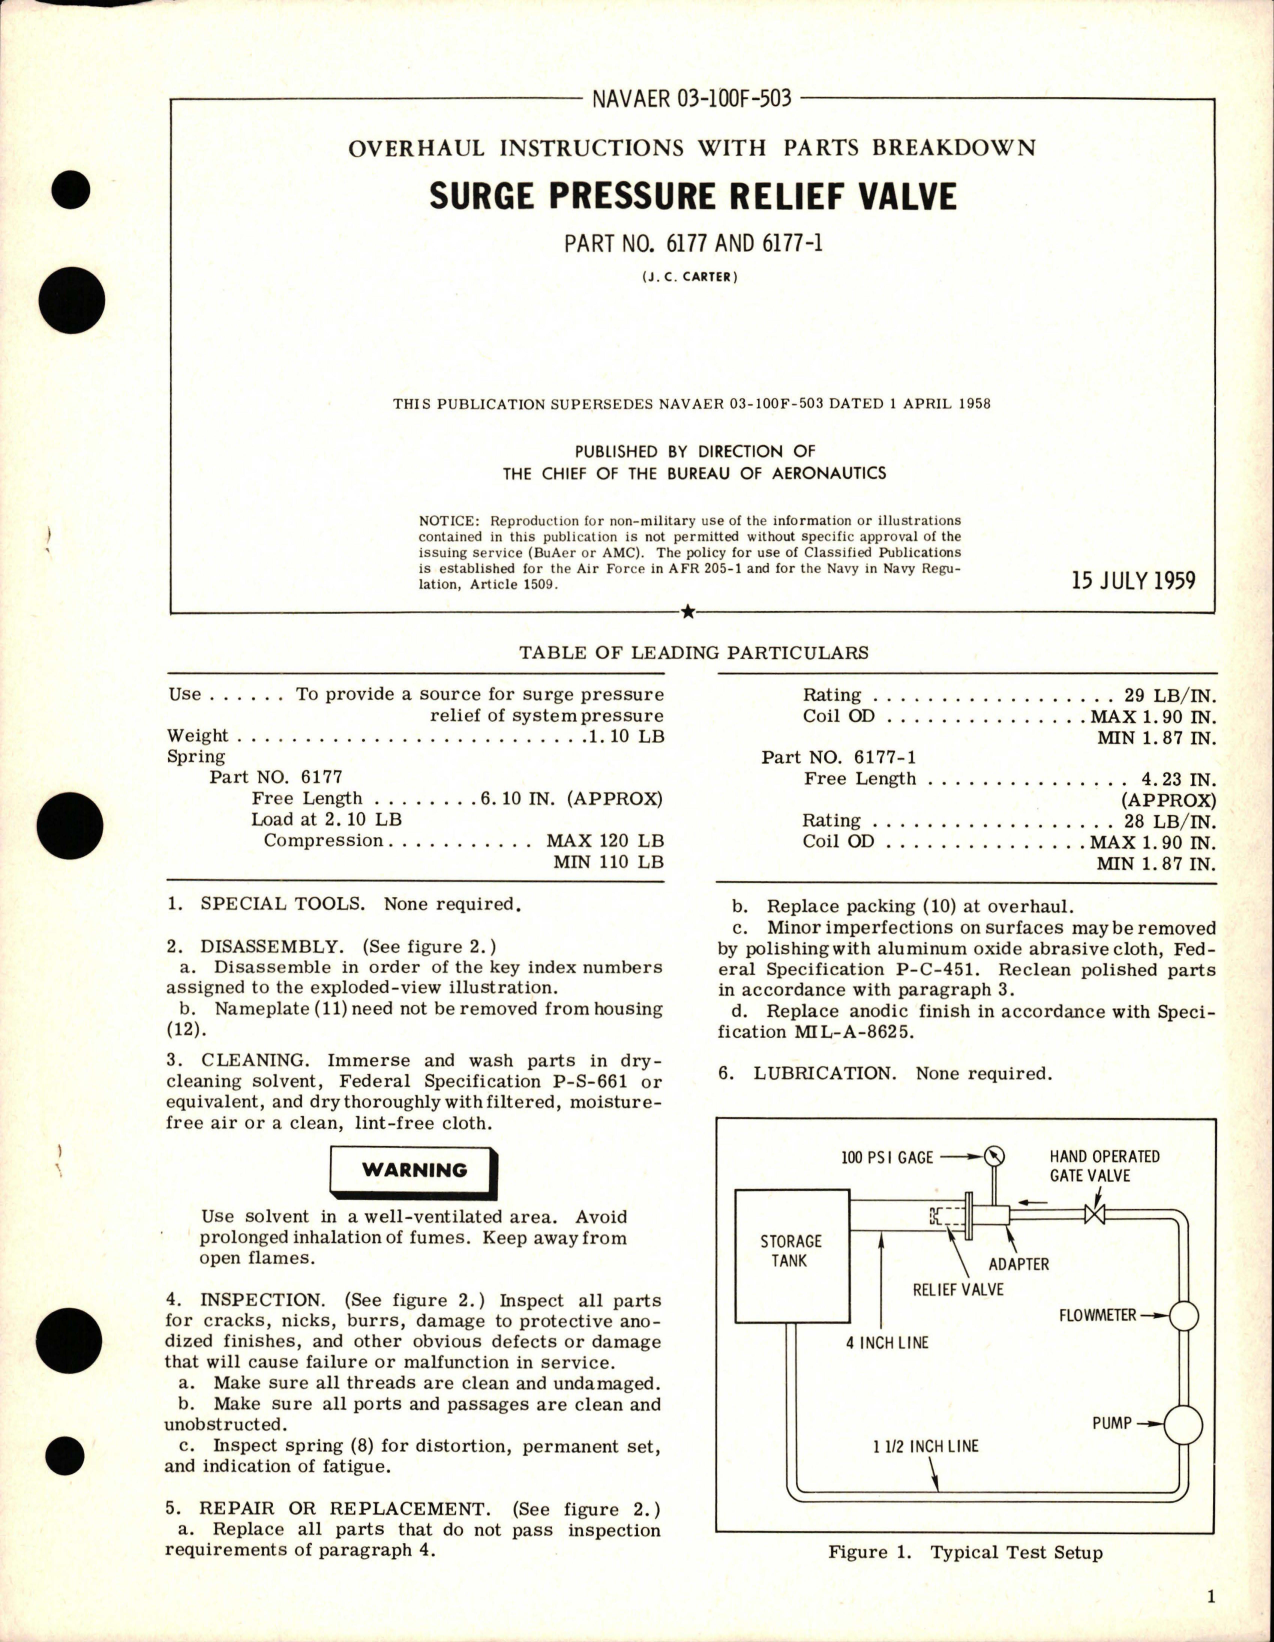 Sample page 1 from AirCorps Library document: Overhaul Instructions with Parts Breakdown for Surge Pressure Relief Valve - Parts 6177 and 6177-1 